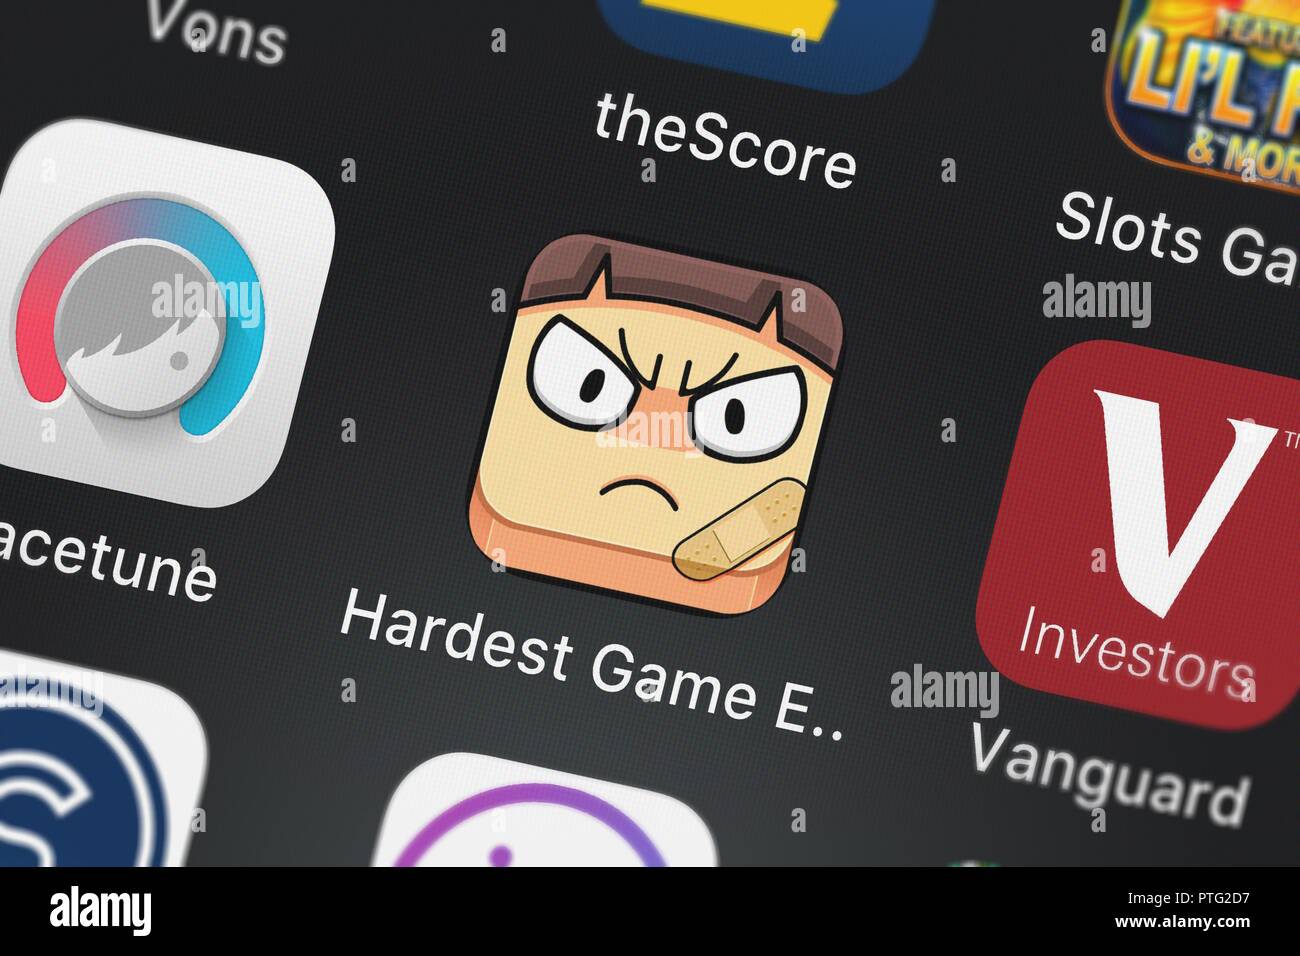 Hardest Game Ever 2 (By Orangenose Studio) iOS/Android Gameplay